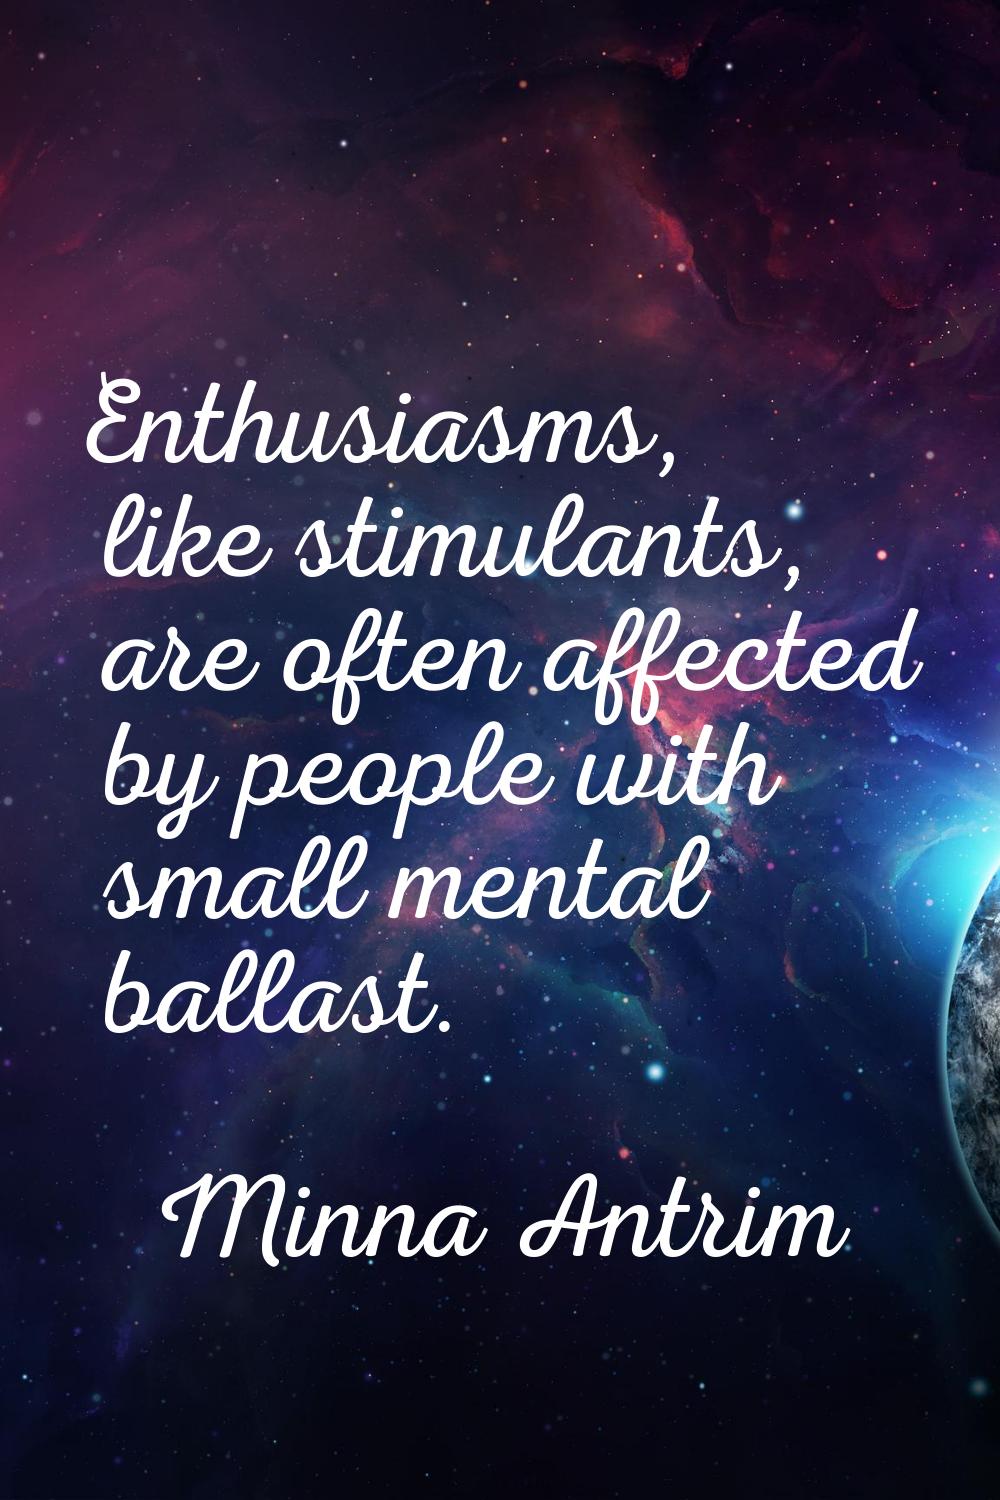 Enthusiasms, like stimulants, are often affected by people with small mental ballast.